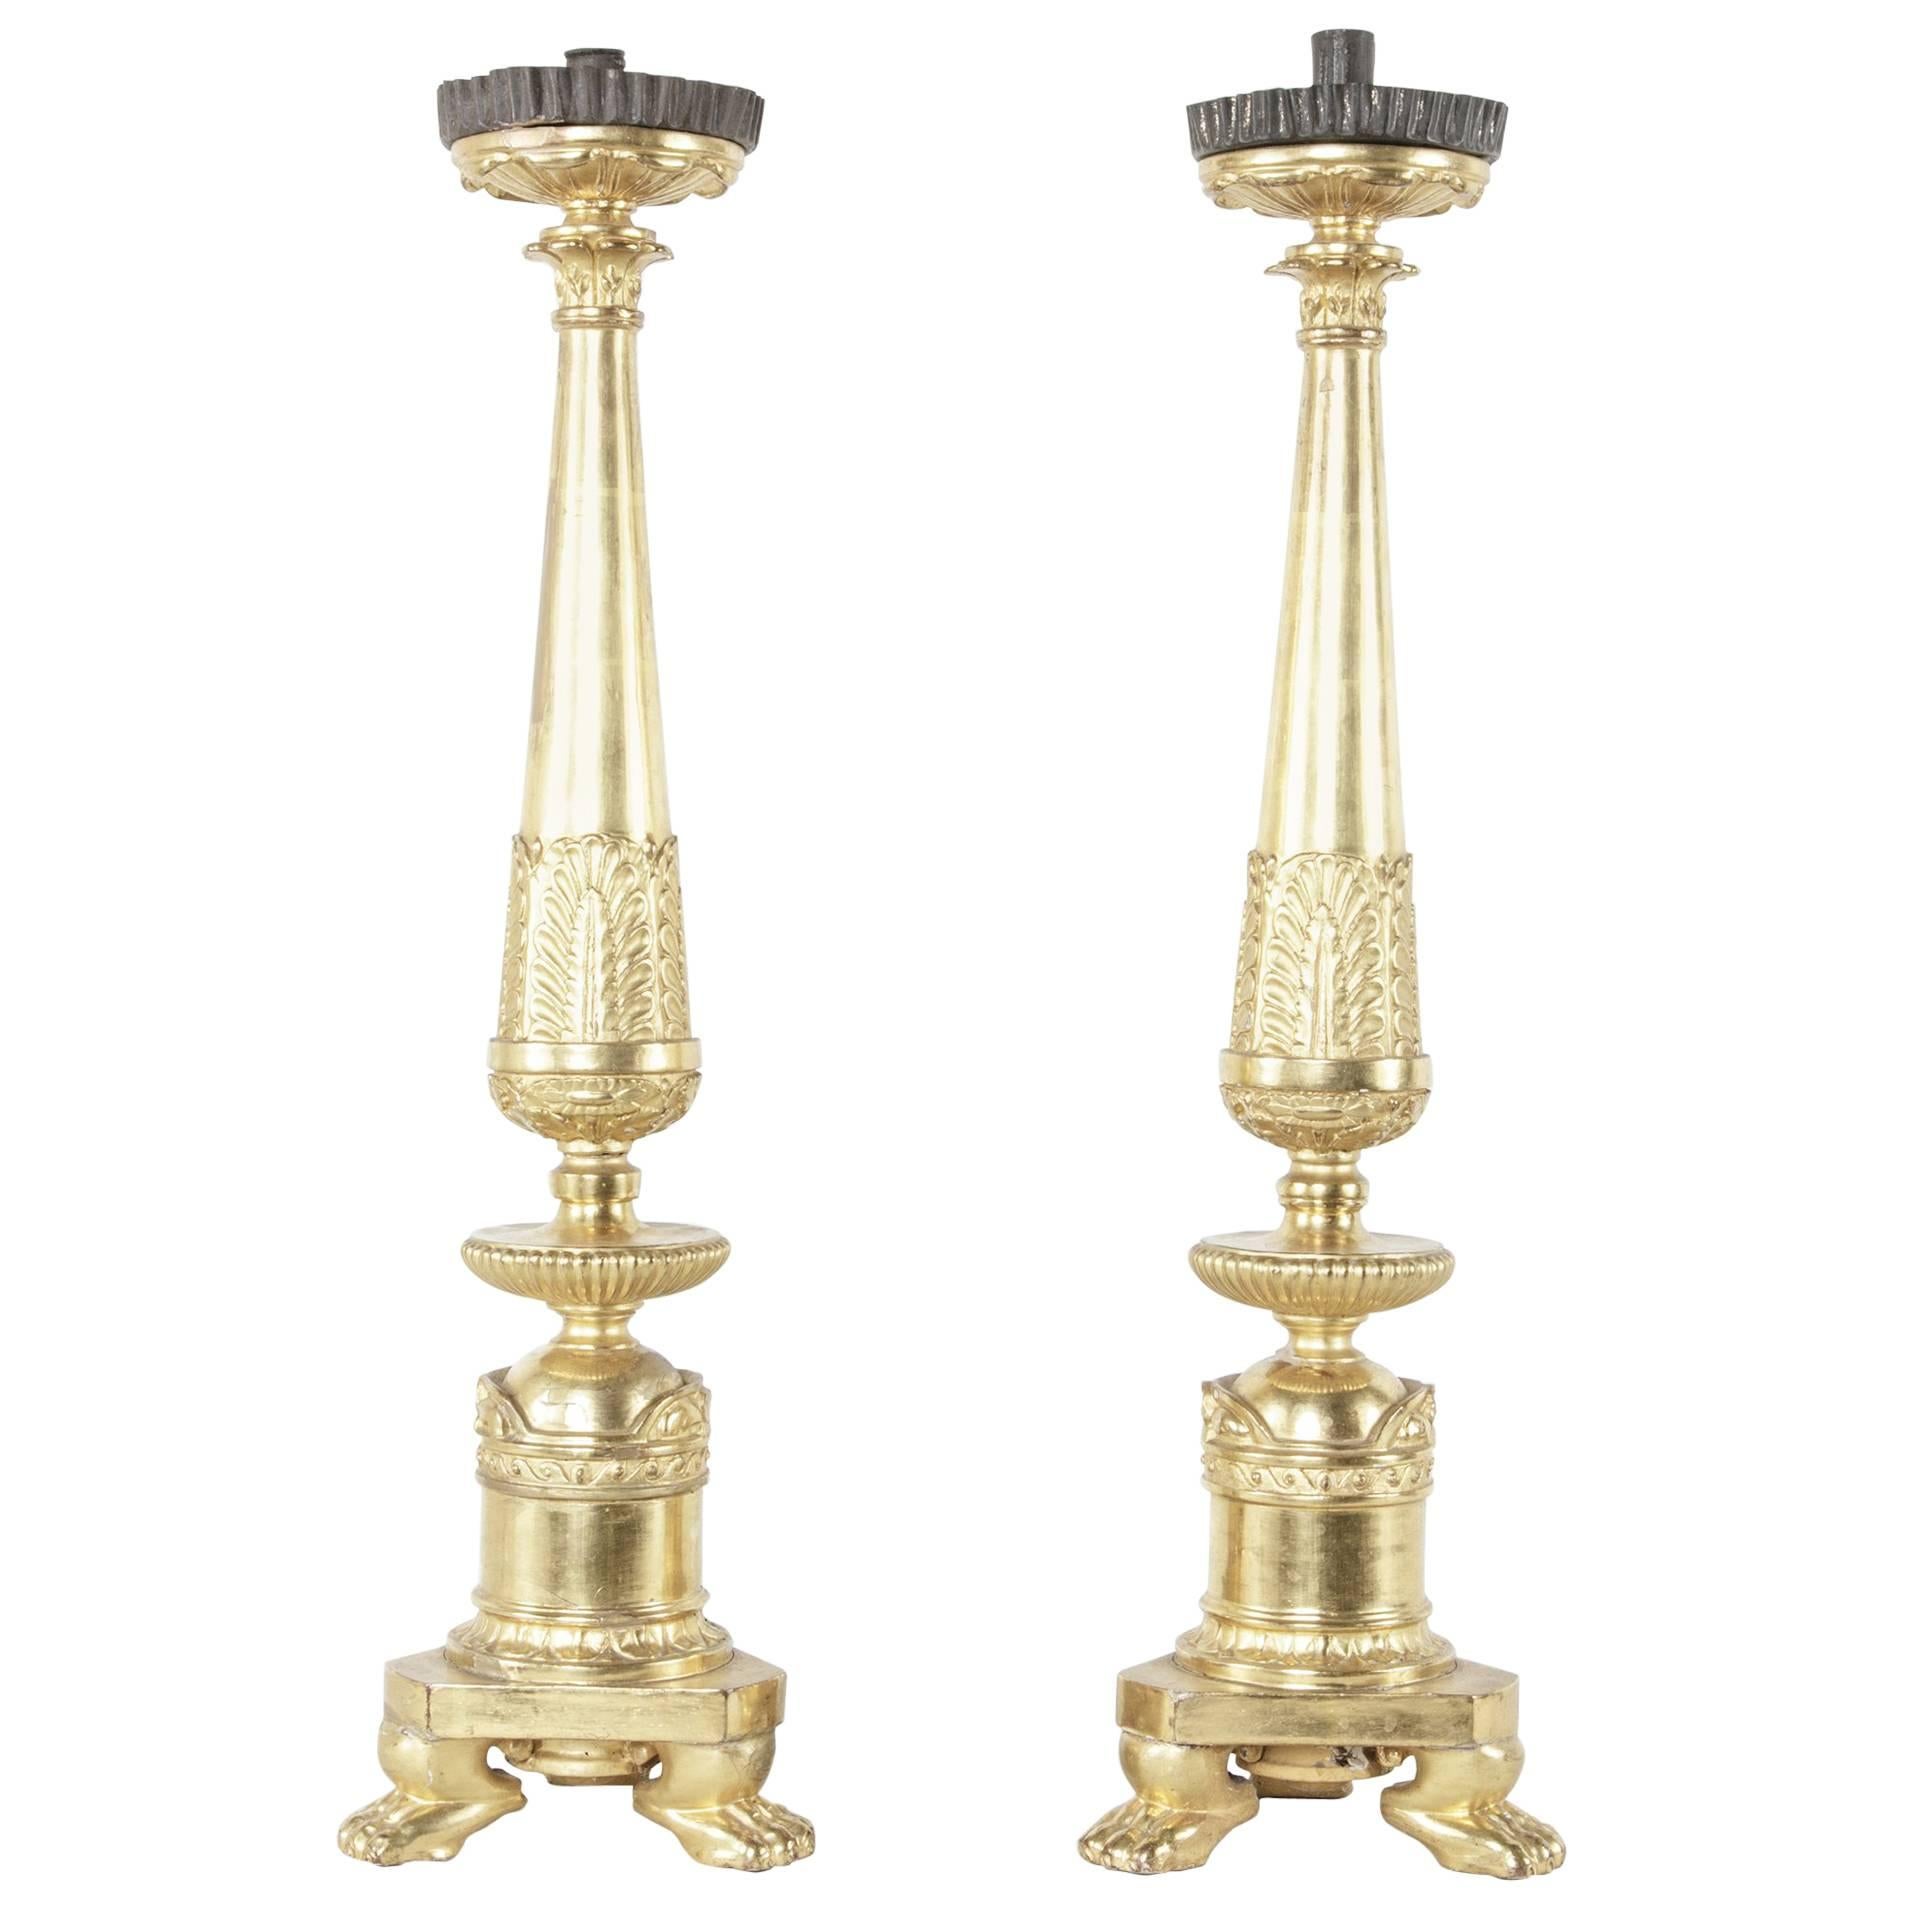 Early 19th Century French Empire Period Giltwood Candlesticks or Prickets